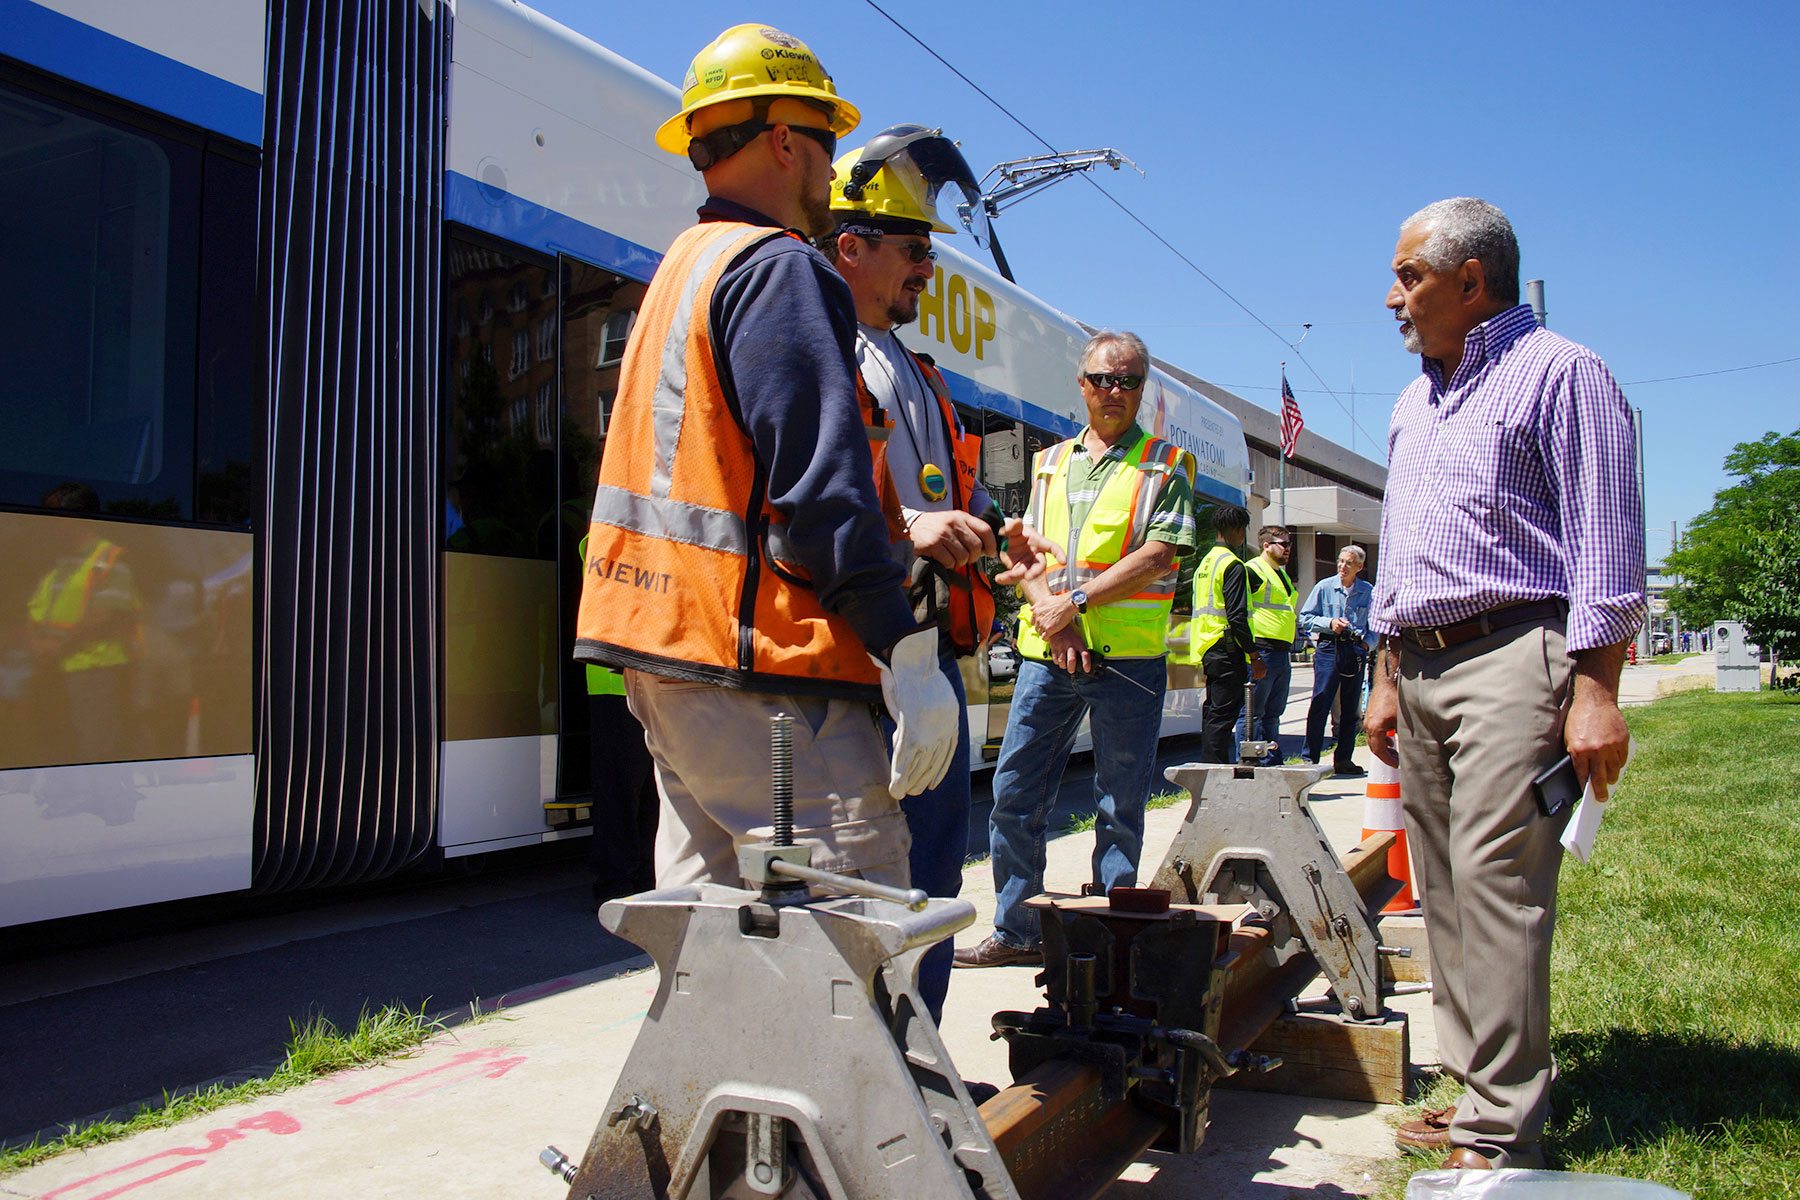 The Hop marks major milestone for end of Streetcar construction with ...